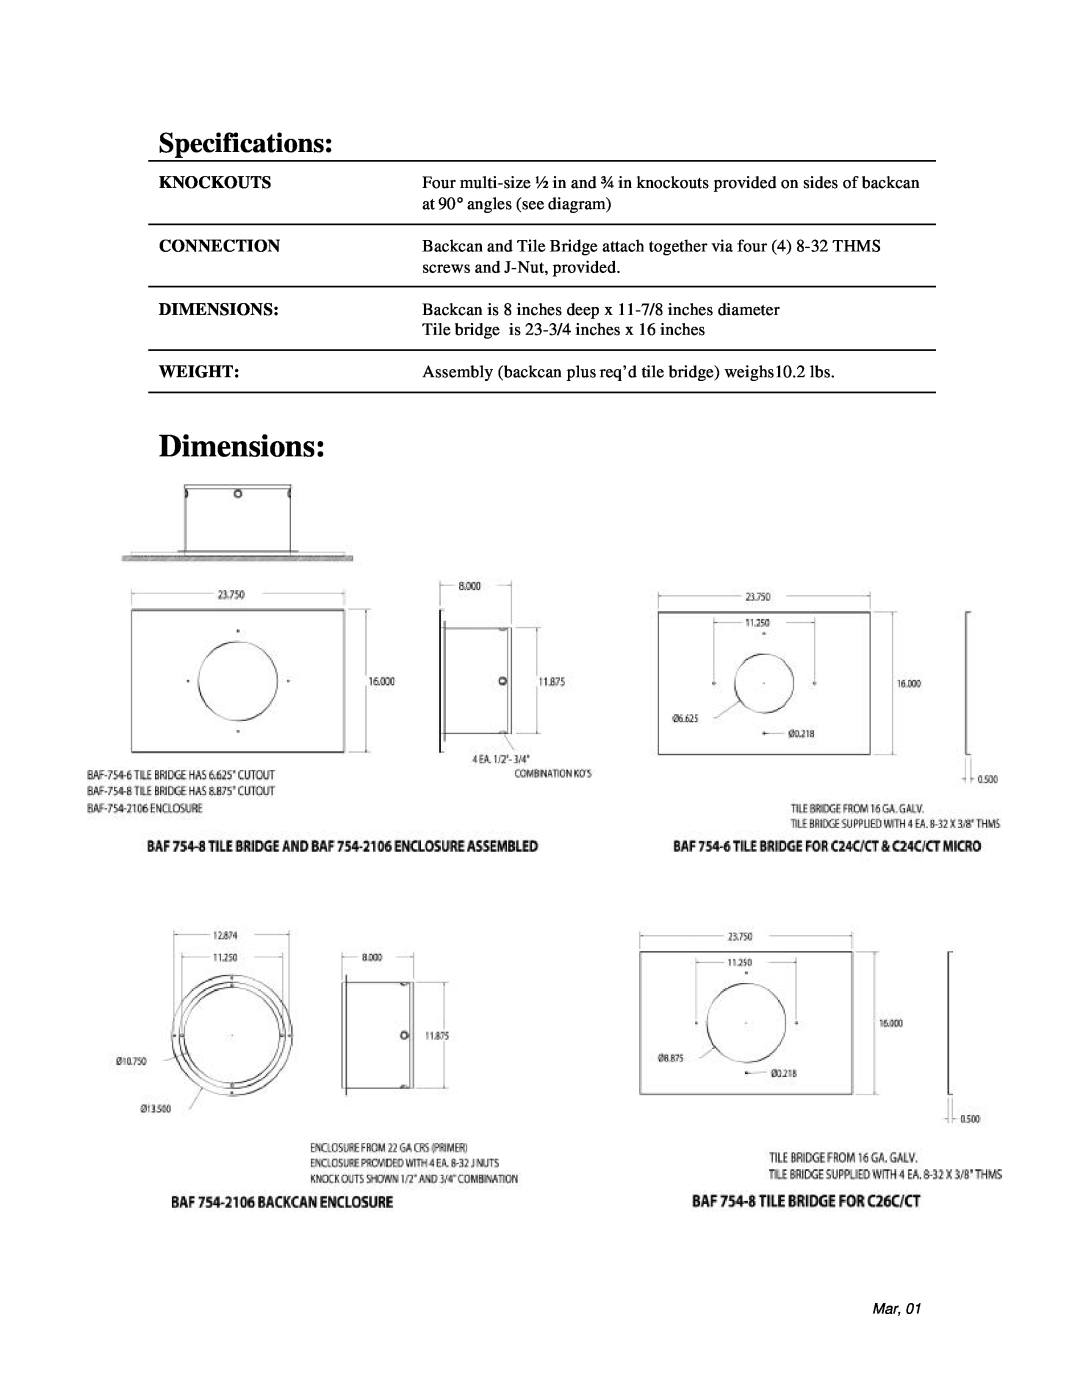 JBL 24C/CT MICRO Dimensions, Specifications, Knockouts, at 90 angles see diagram, Connection, screws and J-Nut, provided 